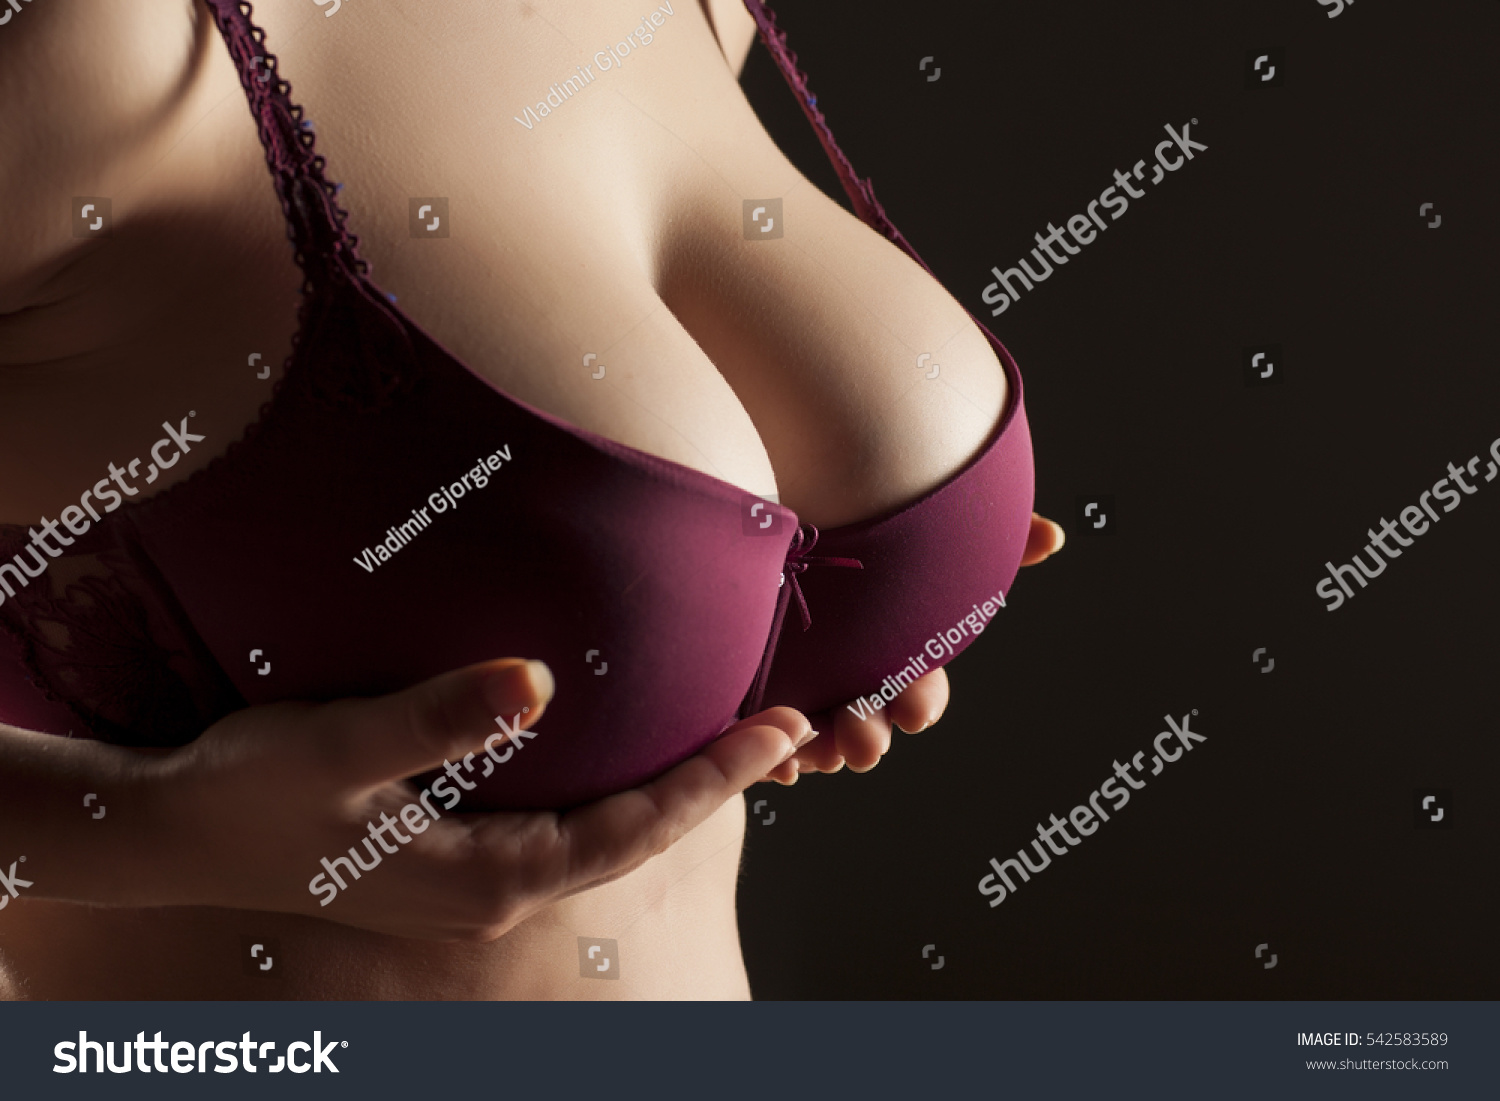 Breasts women with nice Woman with